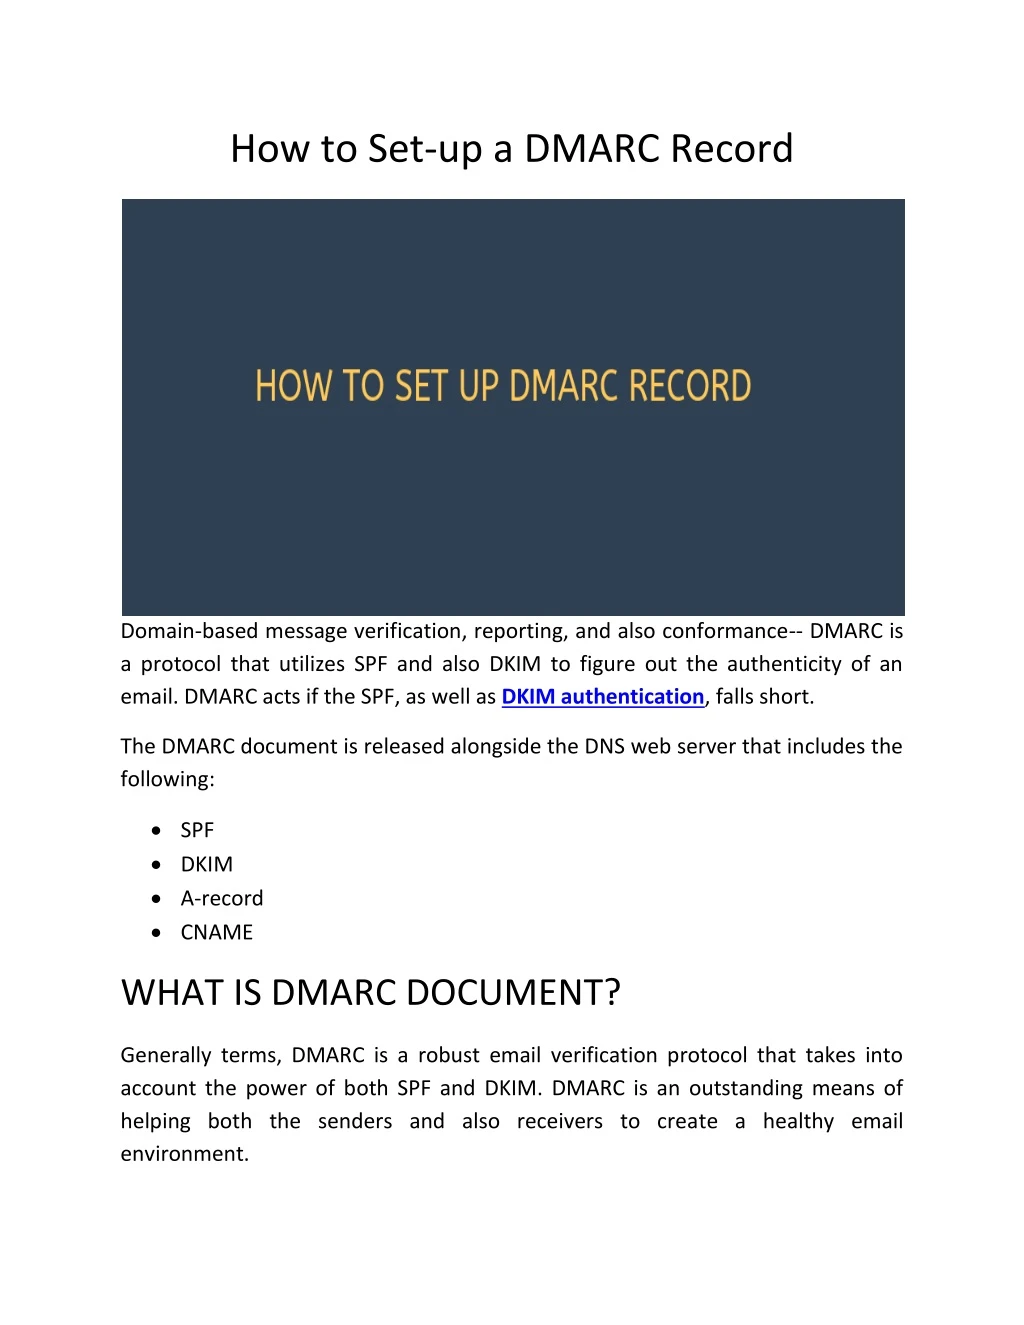 how to set up a dmarc record